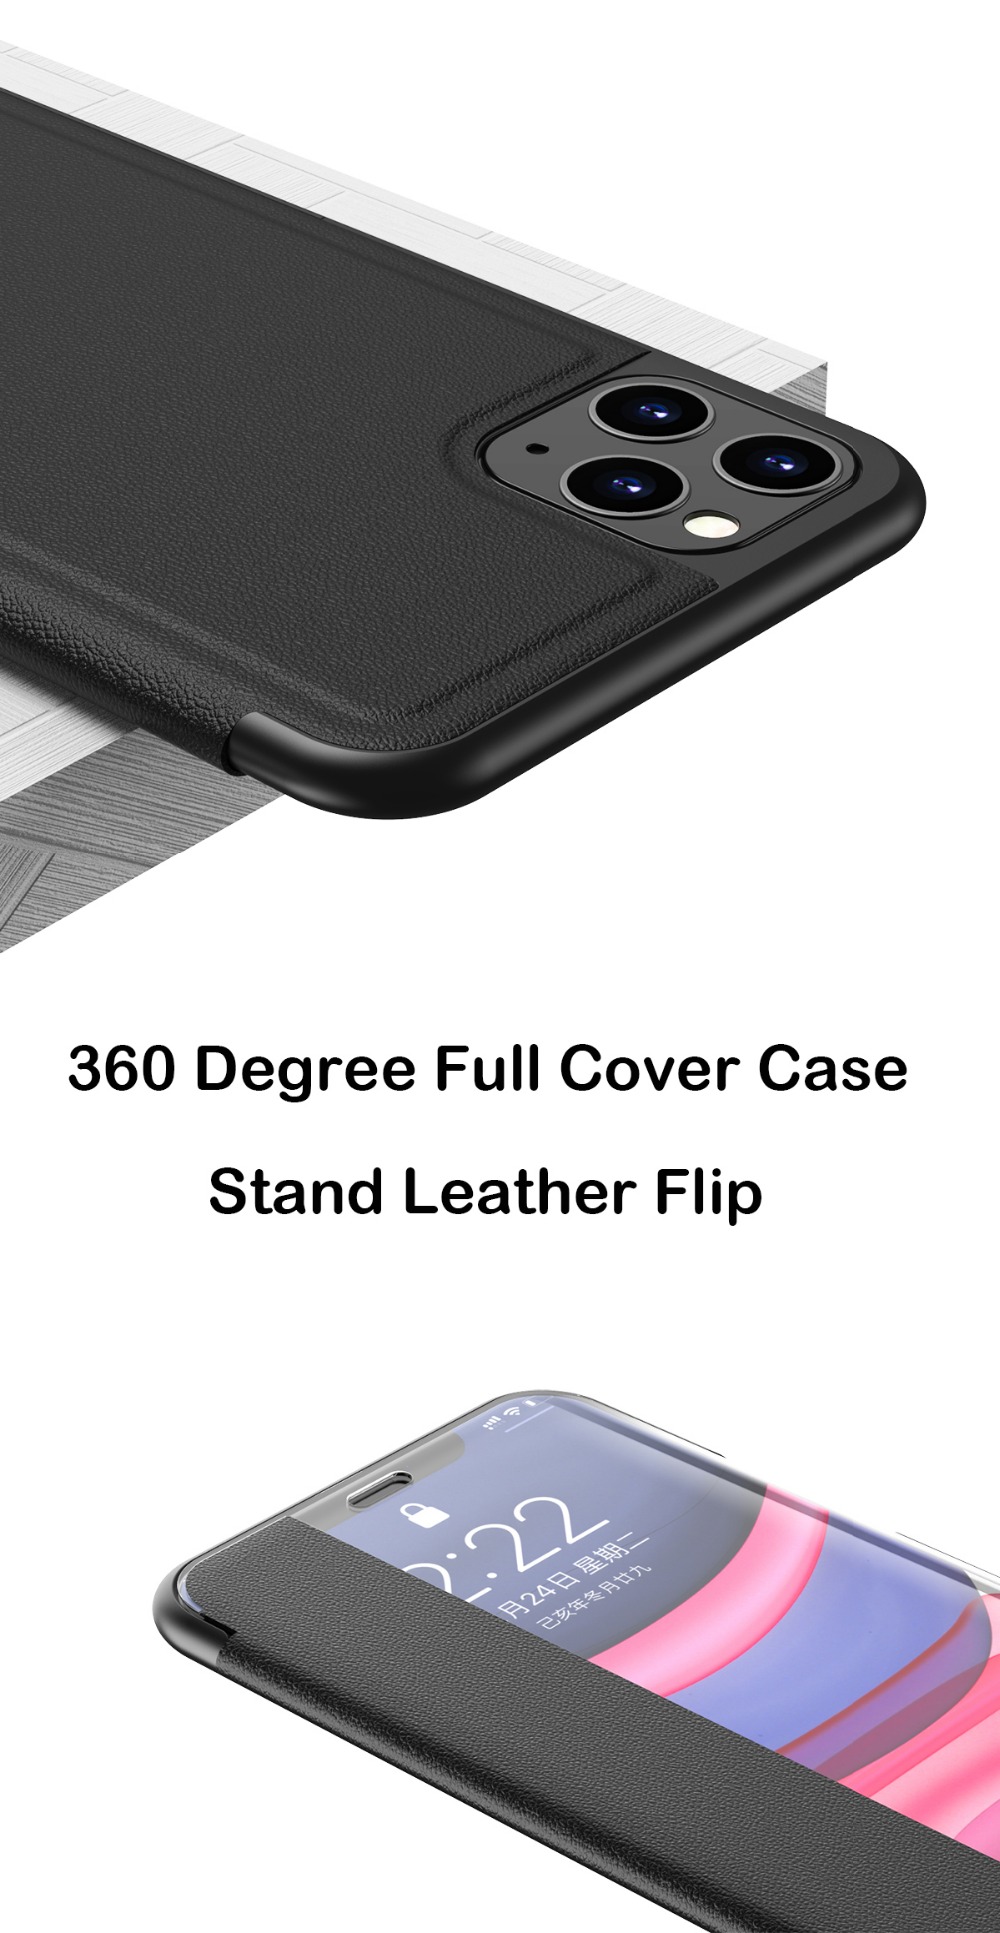 Bakeey-Flip-Bumper-Window-View-with-Foldable-Stand-PU-Leather-Protective-Case-for-iPhone-7-Plus--iP8-1630897-7